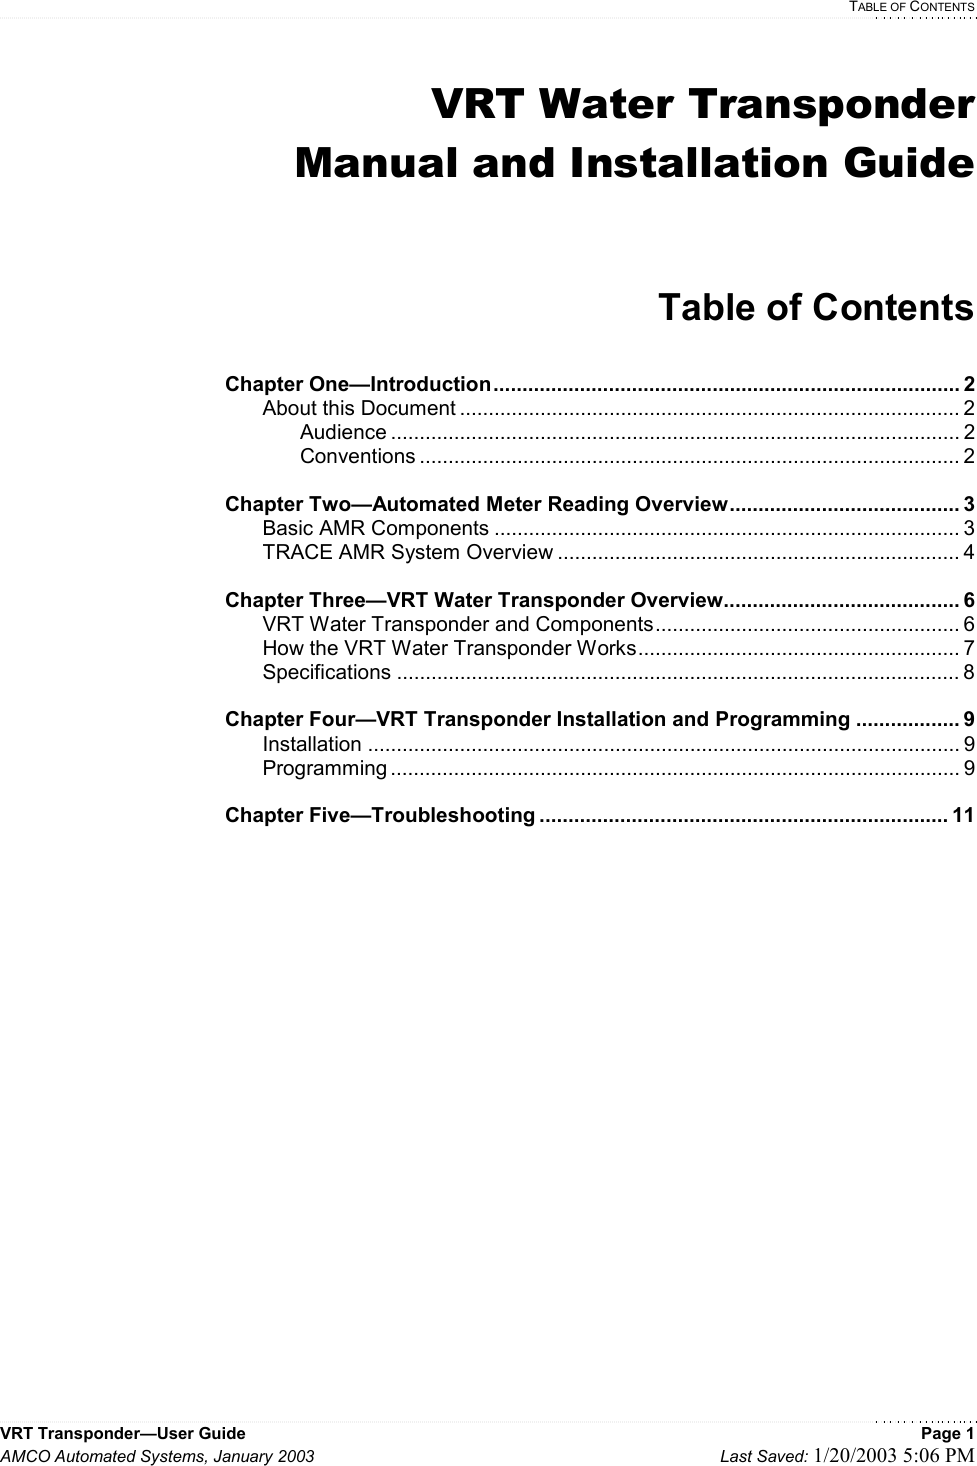   TABLE OF CONTENTS VRT Transponder—User Guide    Page 1 AMCO Automated Systems, January 2003    Last Saved: 1/20/2003 5:06 PM  VRT Water Transponder Manual and Installation Guide   Table of Contents  Chapter One—Introduction................................................................................. 2   About this Document ....................................................................................... 2   Audience ................................................................................................... 2   Conventions .............................................................................................. 2  Chapter Two—Automated Meter Reading Overview........................................ 3  Basic AMR Components ................................................................................. 3   TRACE AMR System Overview ...................................................................... 4  Chapter Three—VRT Water Transponder Overview......................................... 6   VRT Water Transponder and Components..................................................... 6   How the VRT Water Transponder Works........................................................ 7  Specifications .................................................................................................. 8  Chapter Four—VRT Transponder Installation and Programming .................. 9  Installation ....................................................................................................... 9  Programming ................................................................................................... 9  Chapter Five—Troubleshooting ....................................................................... 11           